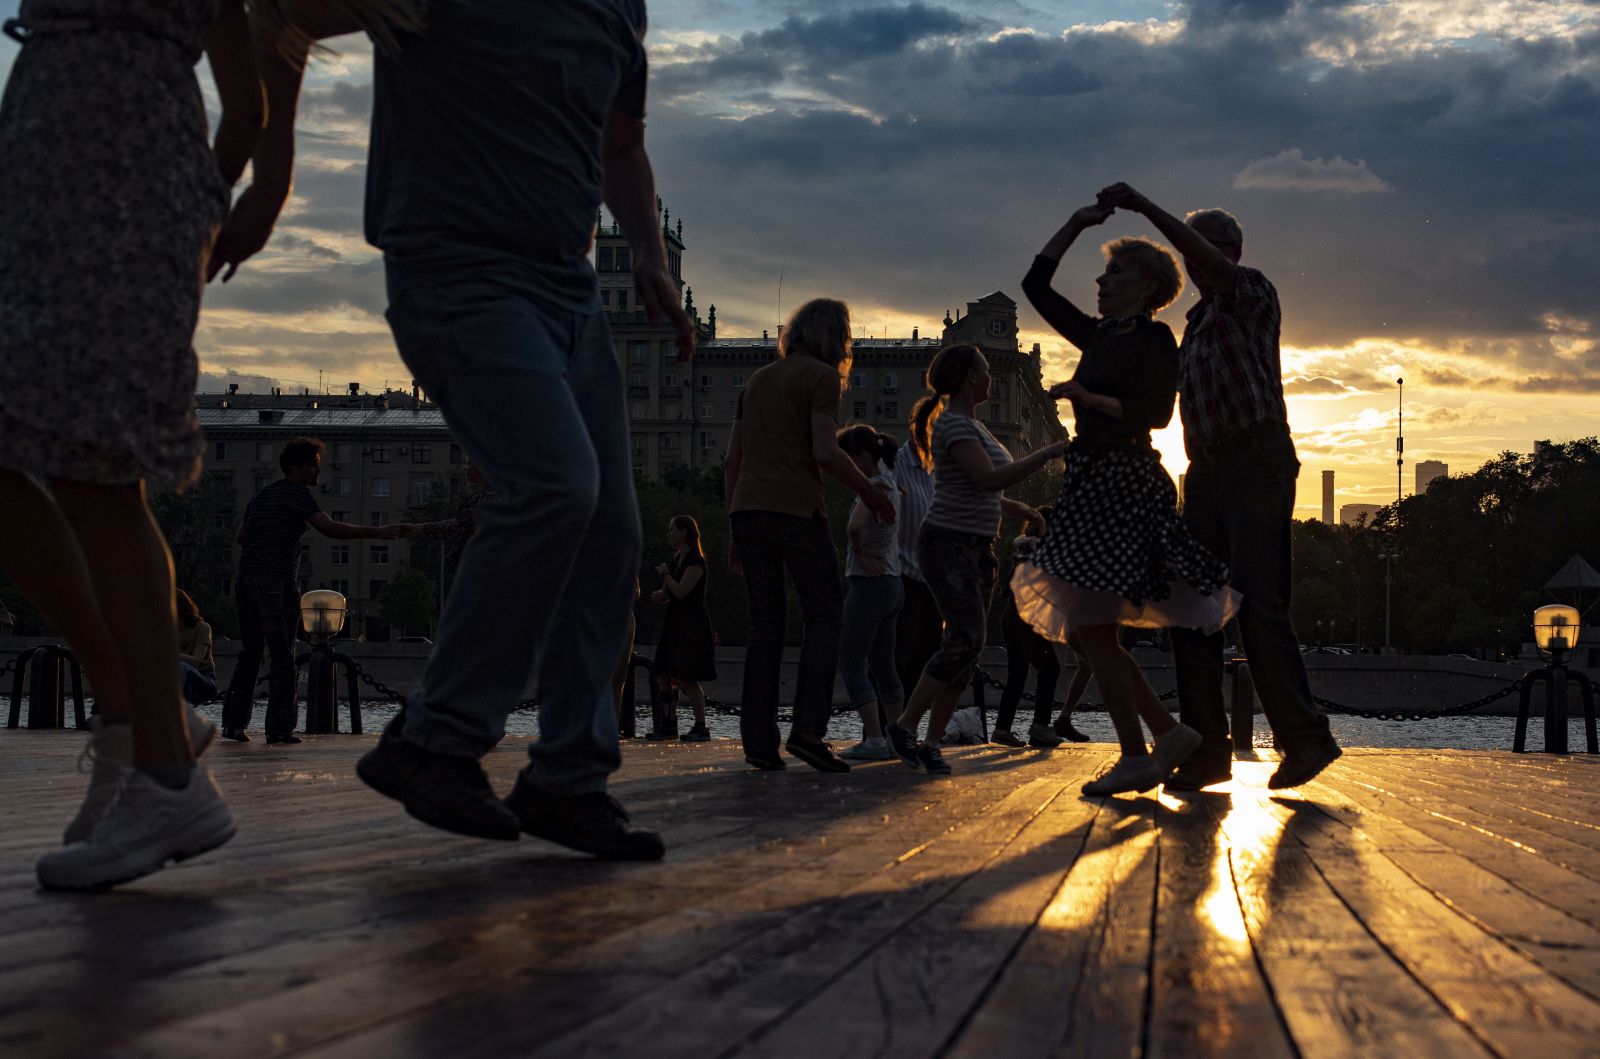 epa09252284 People dance on the embankment of Moscow river during Sunset in downtown of Moscow, Russia, 06 June 2021. Several hundred people self-organize through social networks and come together on warm and fine evenings to dance bachata, kizomba, salsa and merengue.  EPA/SERGEI ILNITSKY